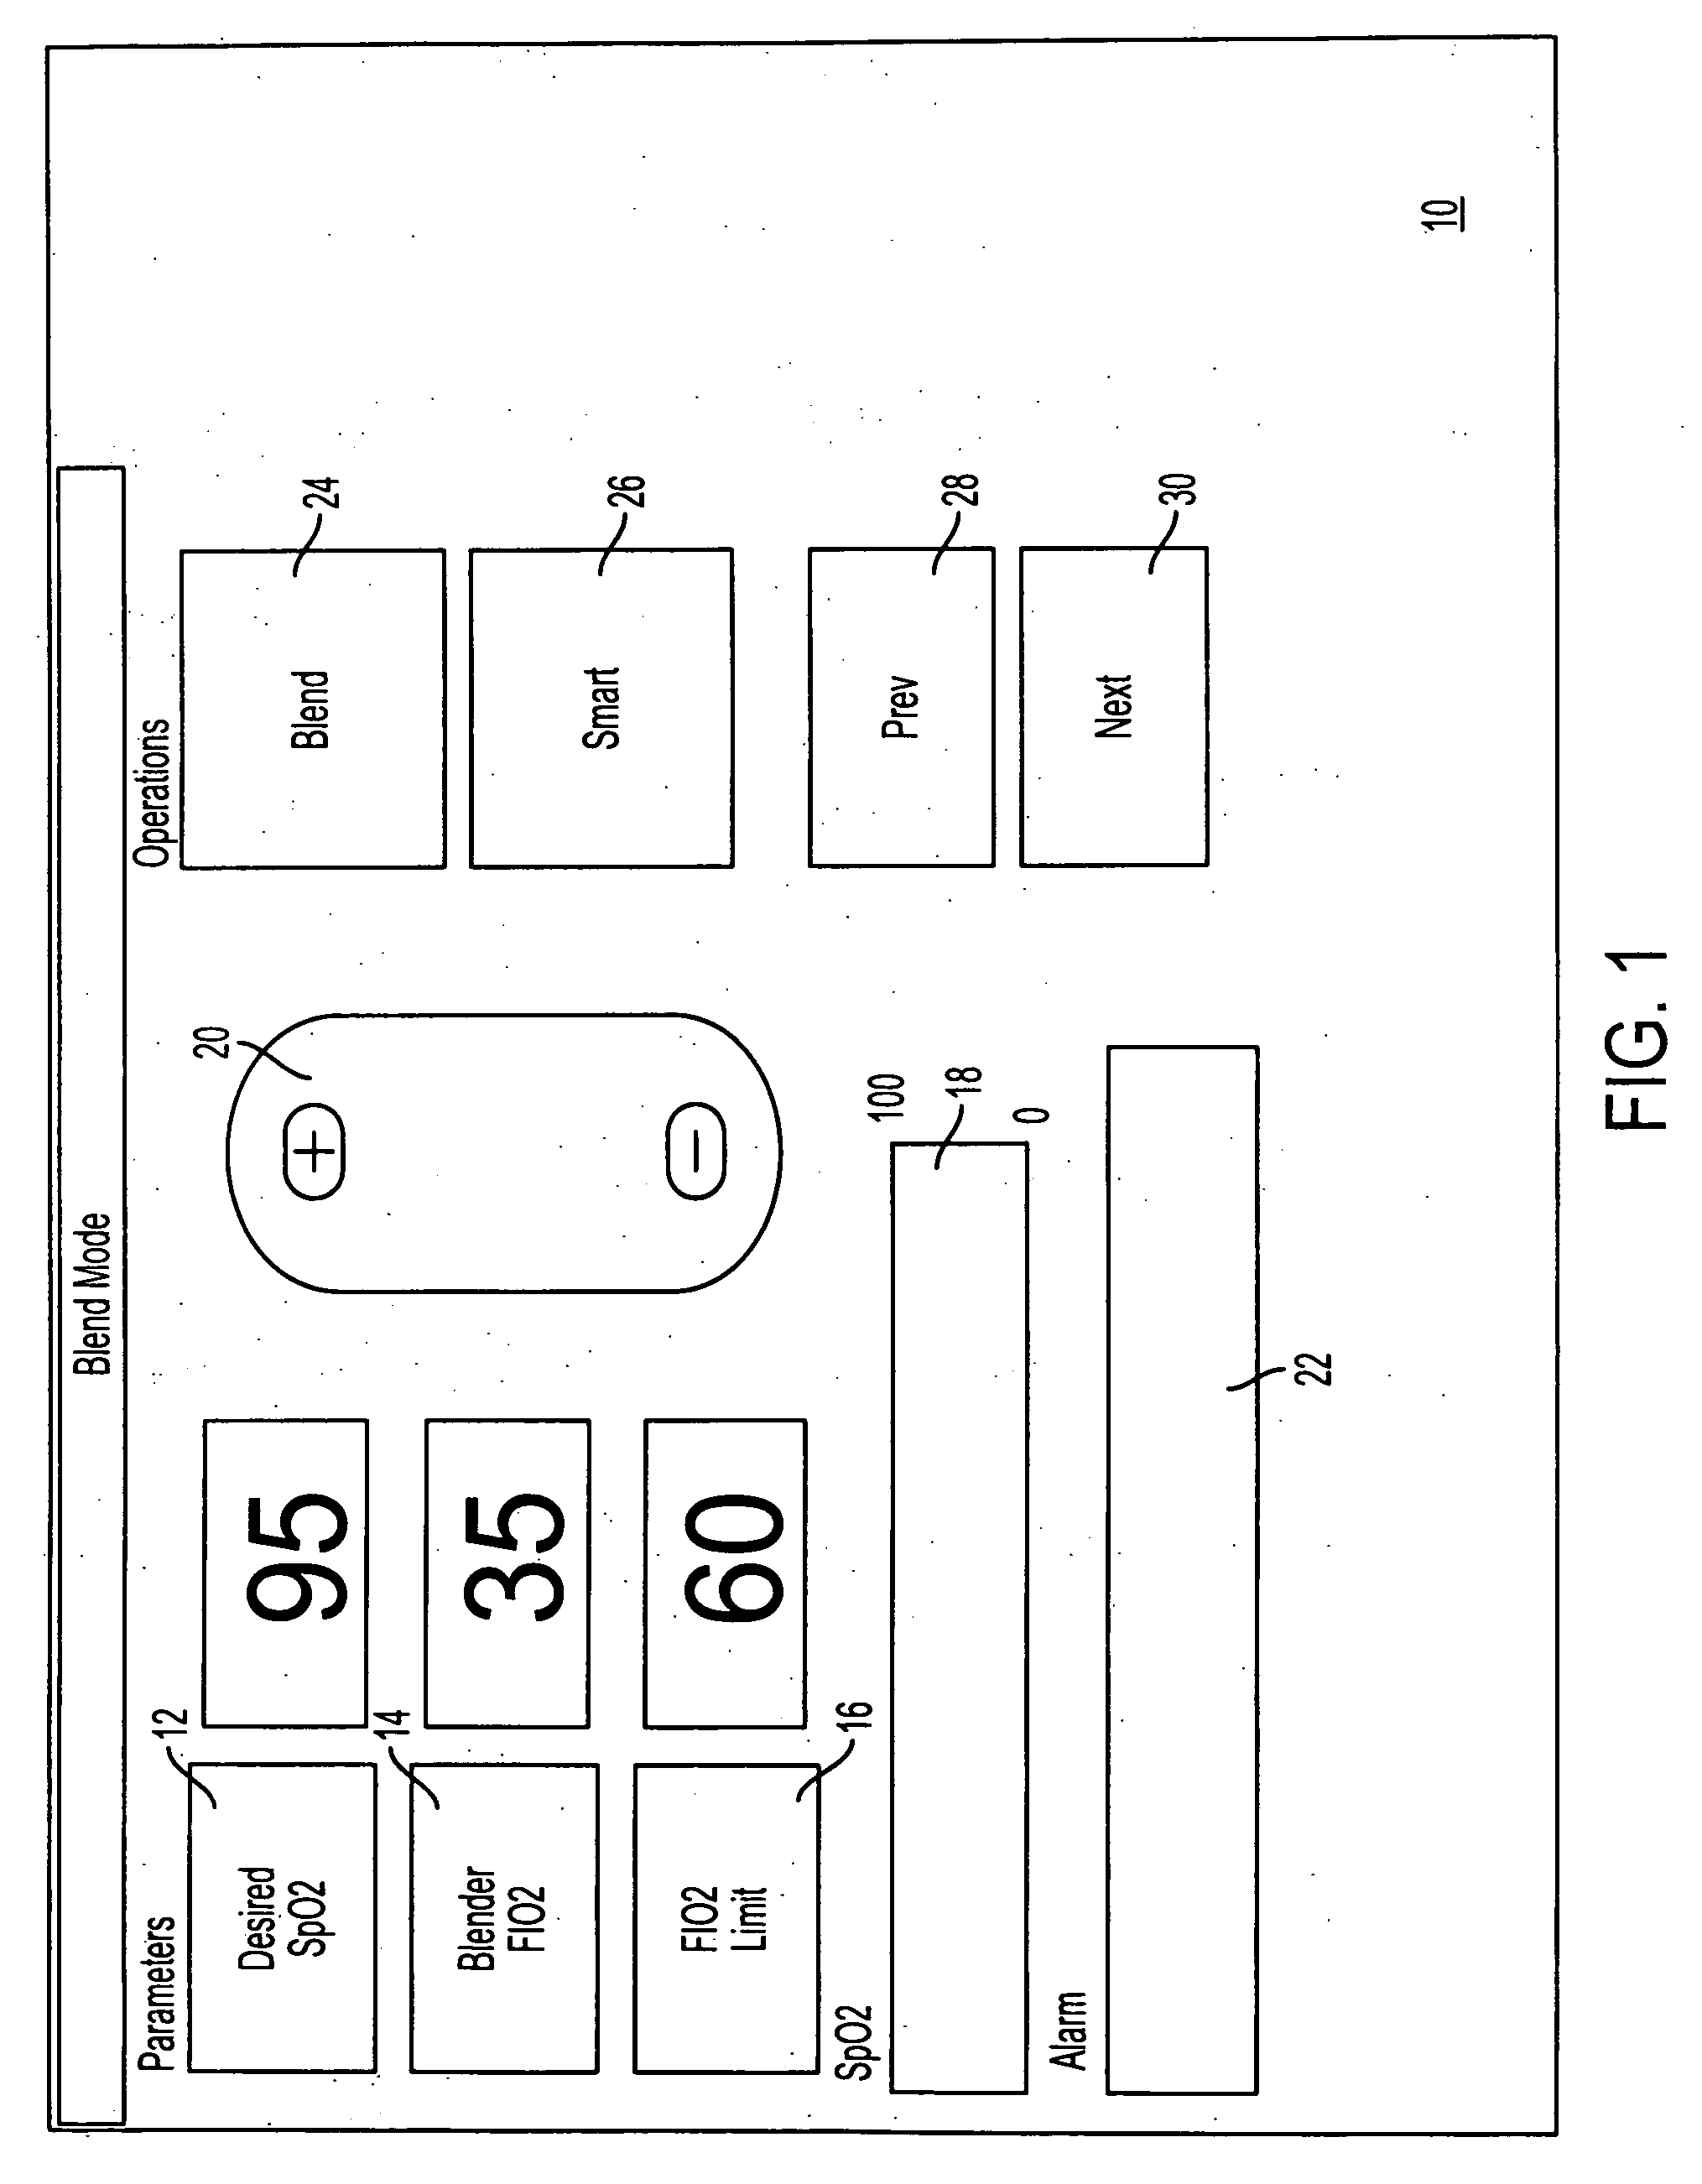 Display, data storage and alarm features of an adaptive oxygen controller